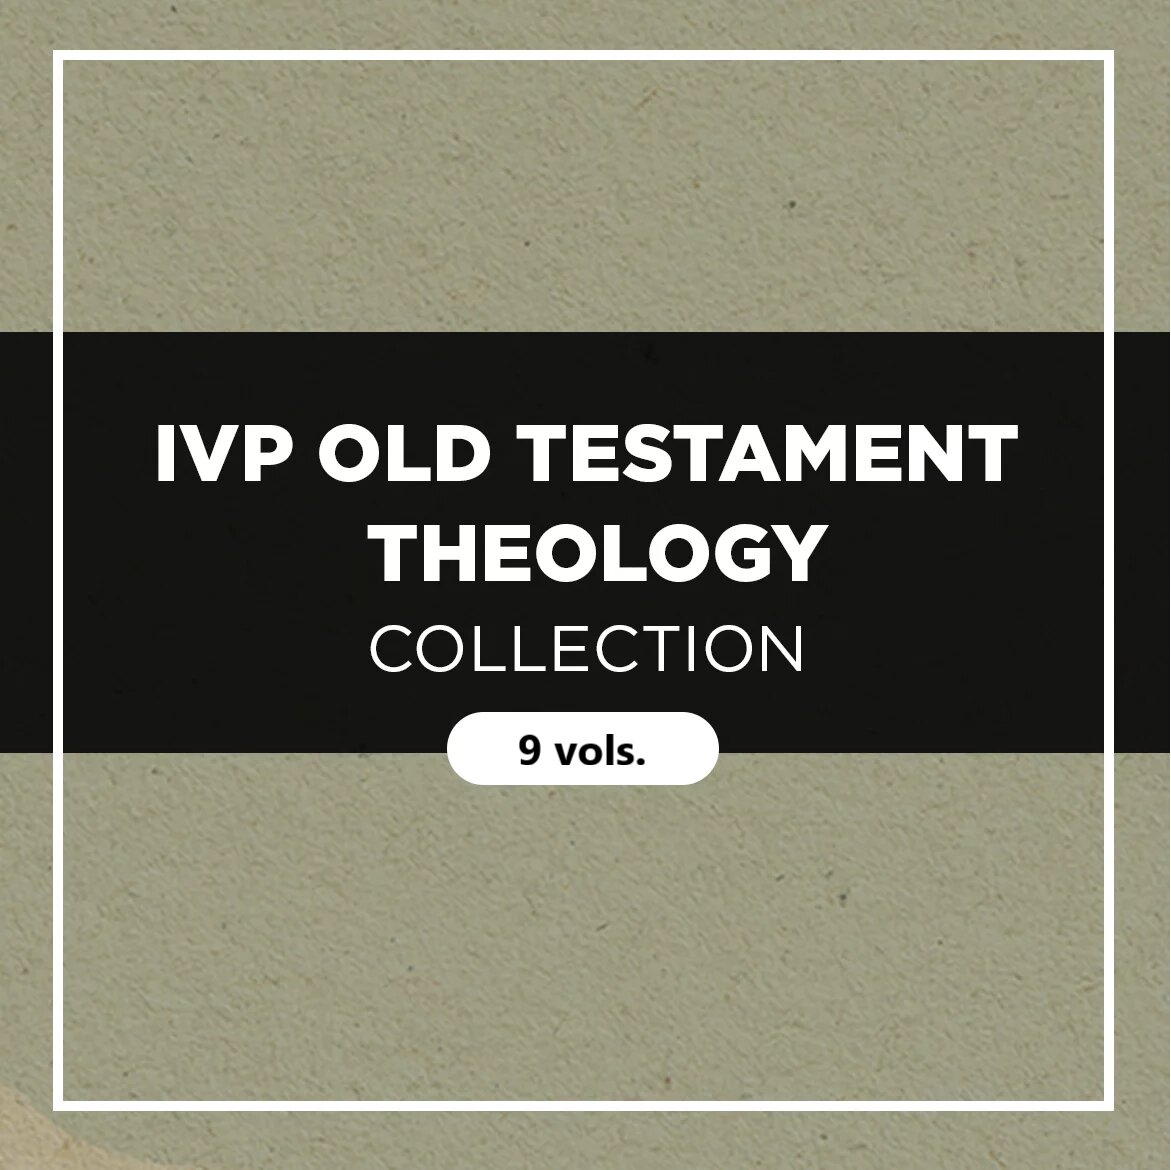 IVP Old Testament Theology Collection (9 vols.)